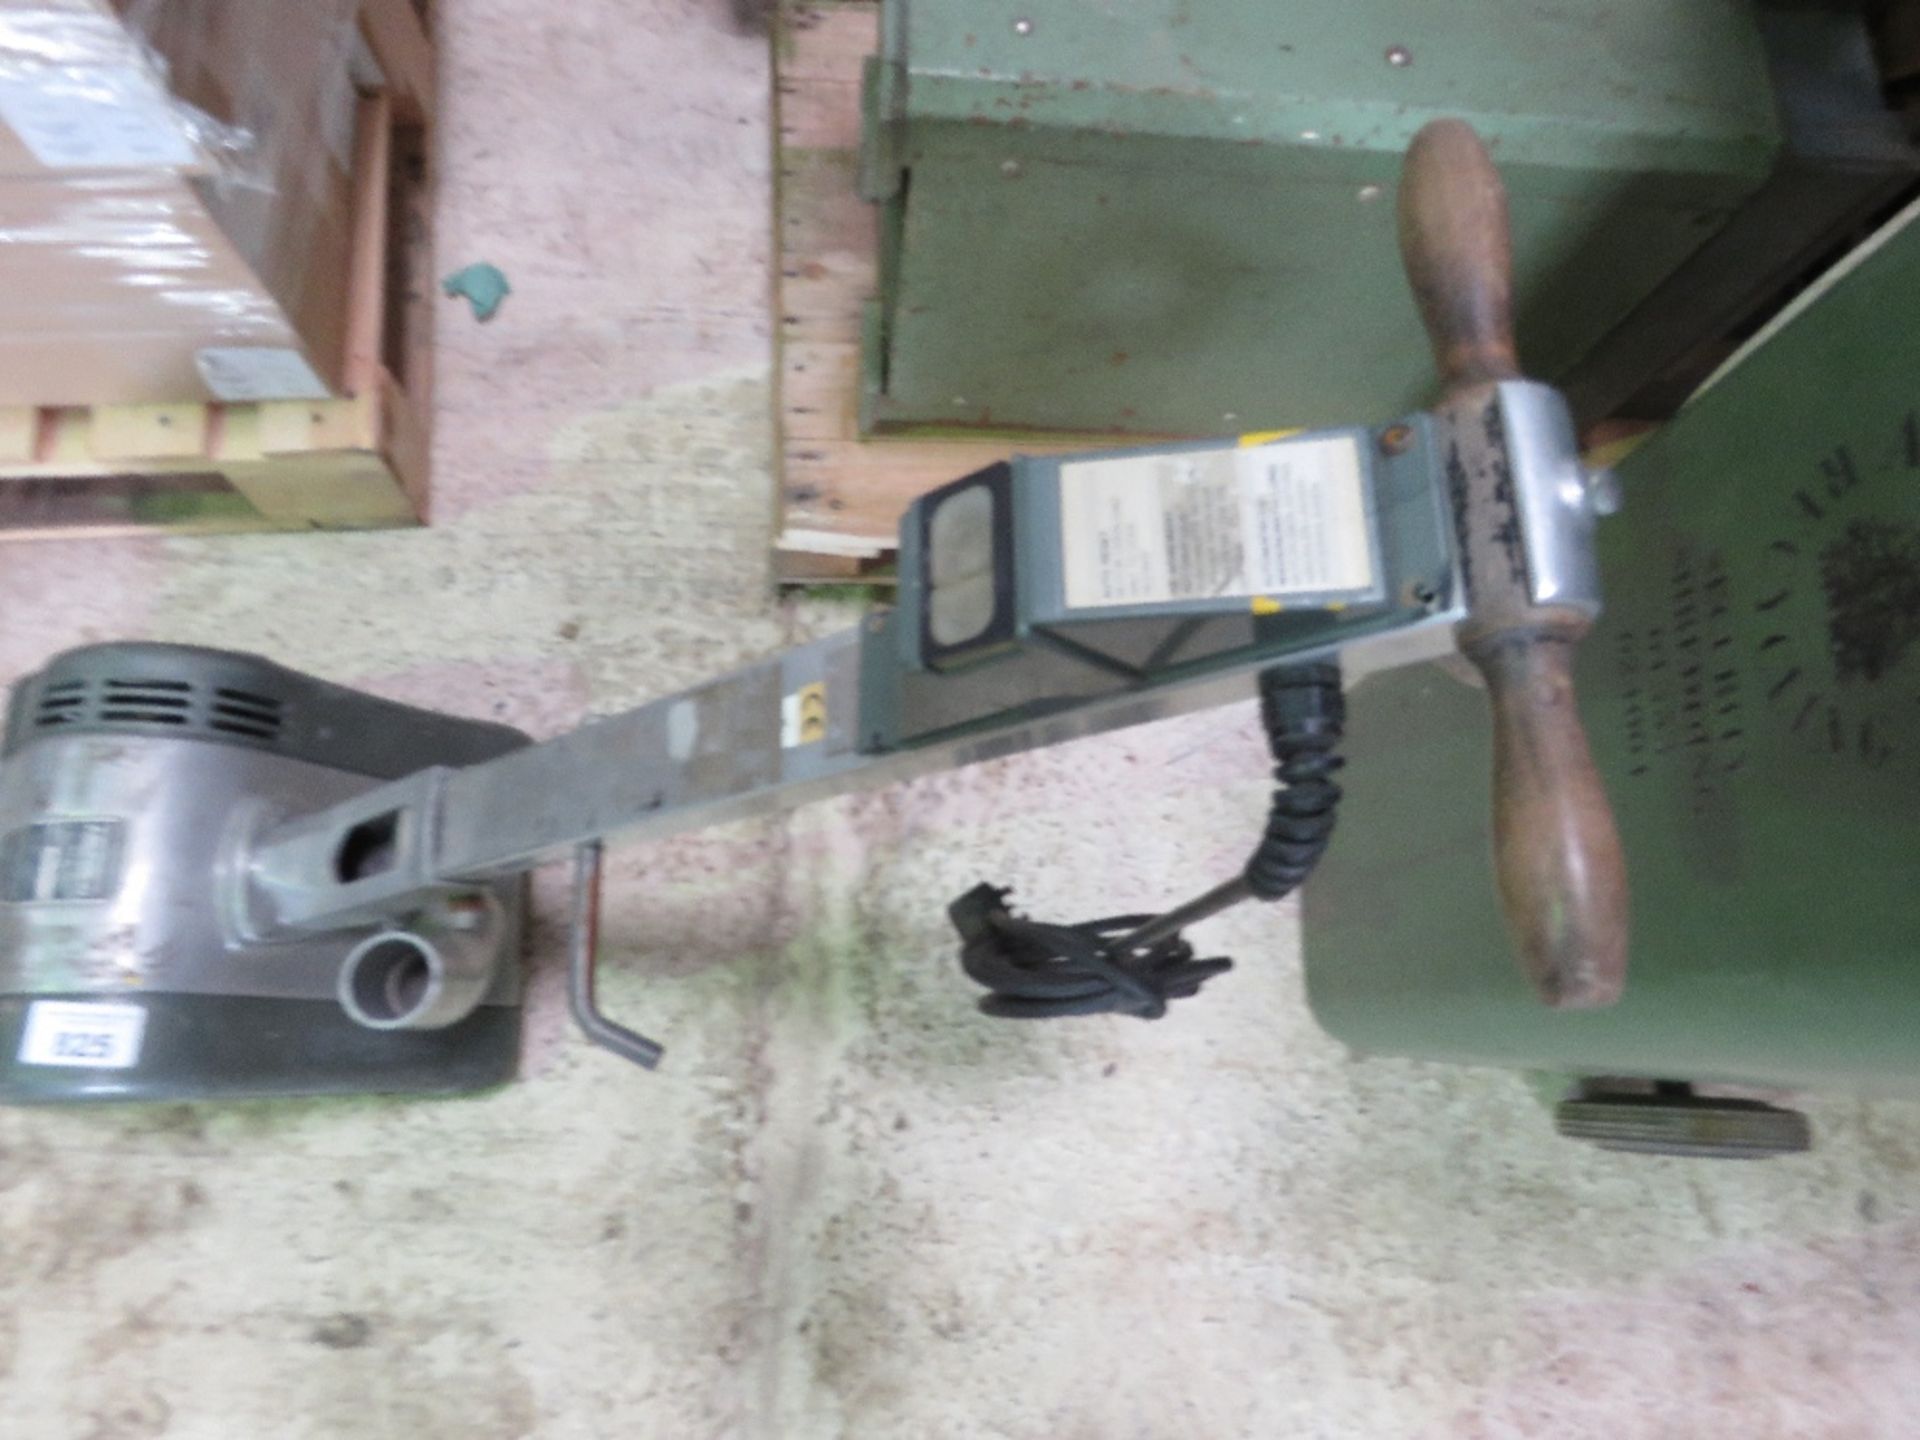 HIRETECH 240VOLT FLOOR SANDER.....THIS LOT IS SOLD UNDER THE AUCTIONEERS MARGIN SCHEME, THEREFORE NO - Image 4 of 4